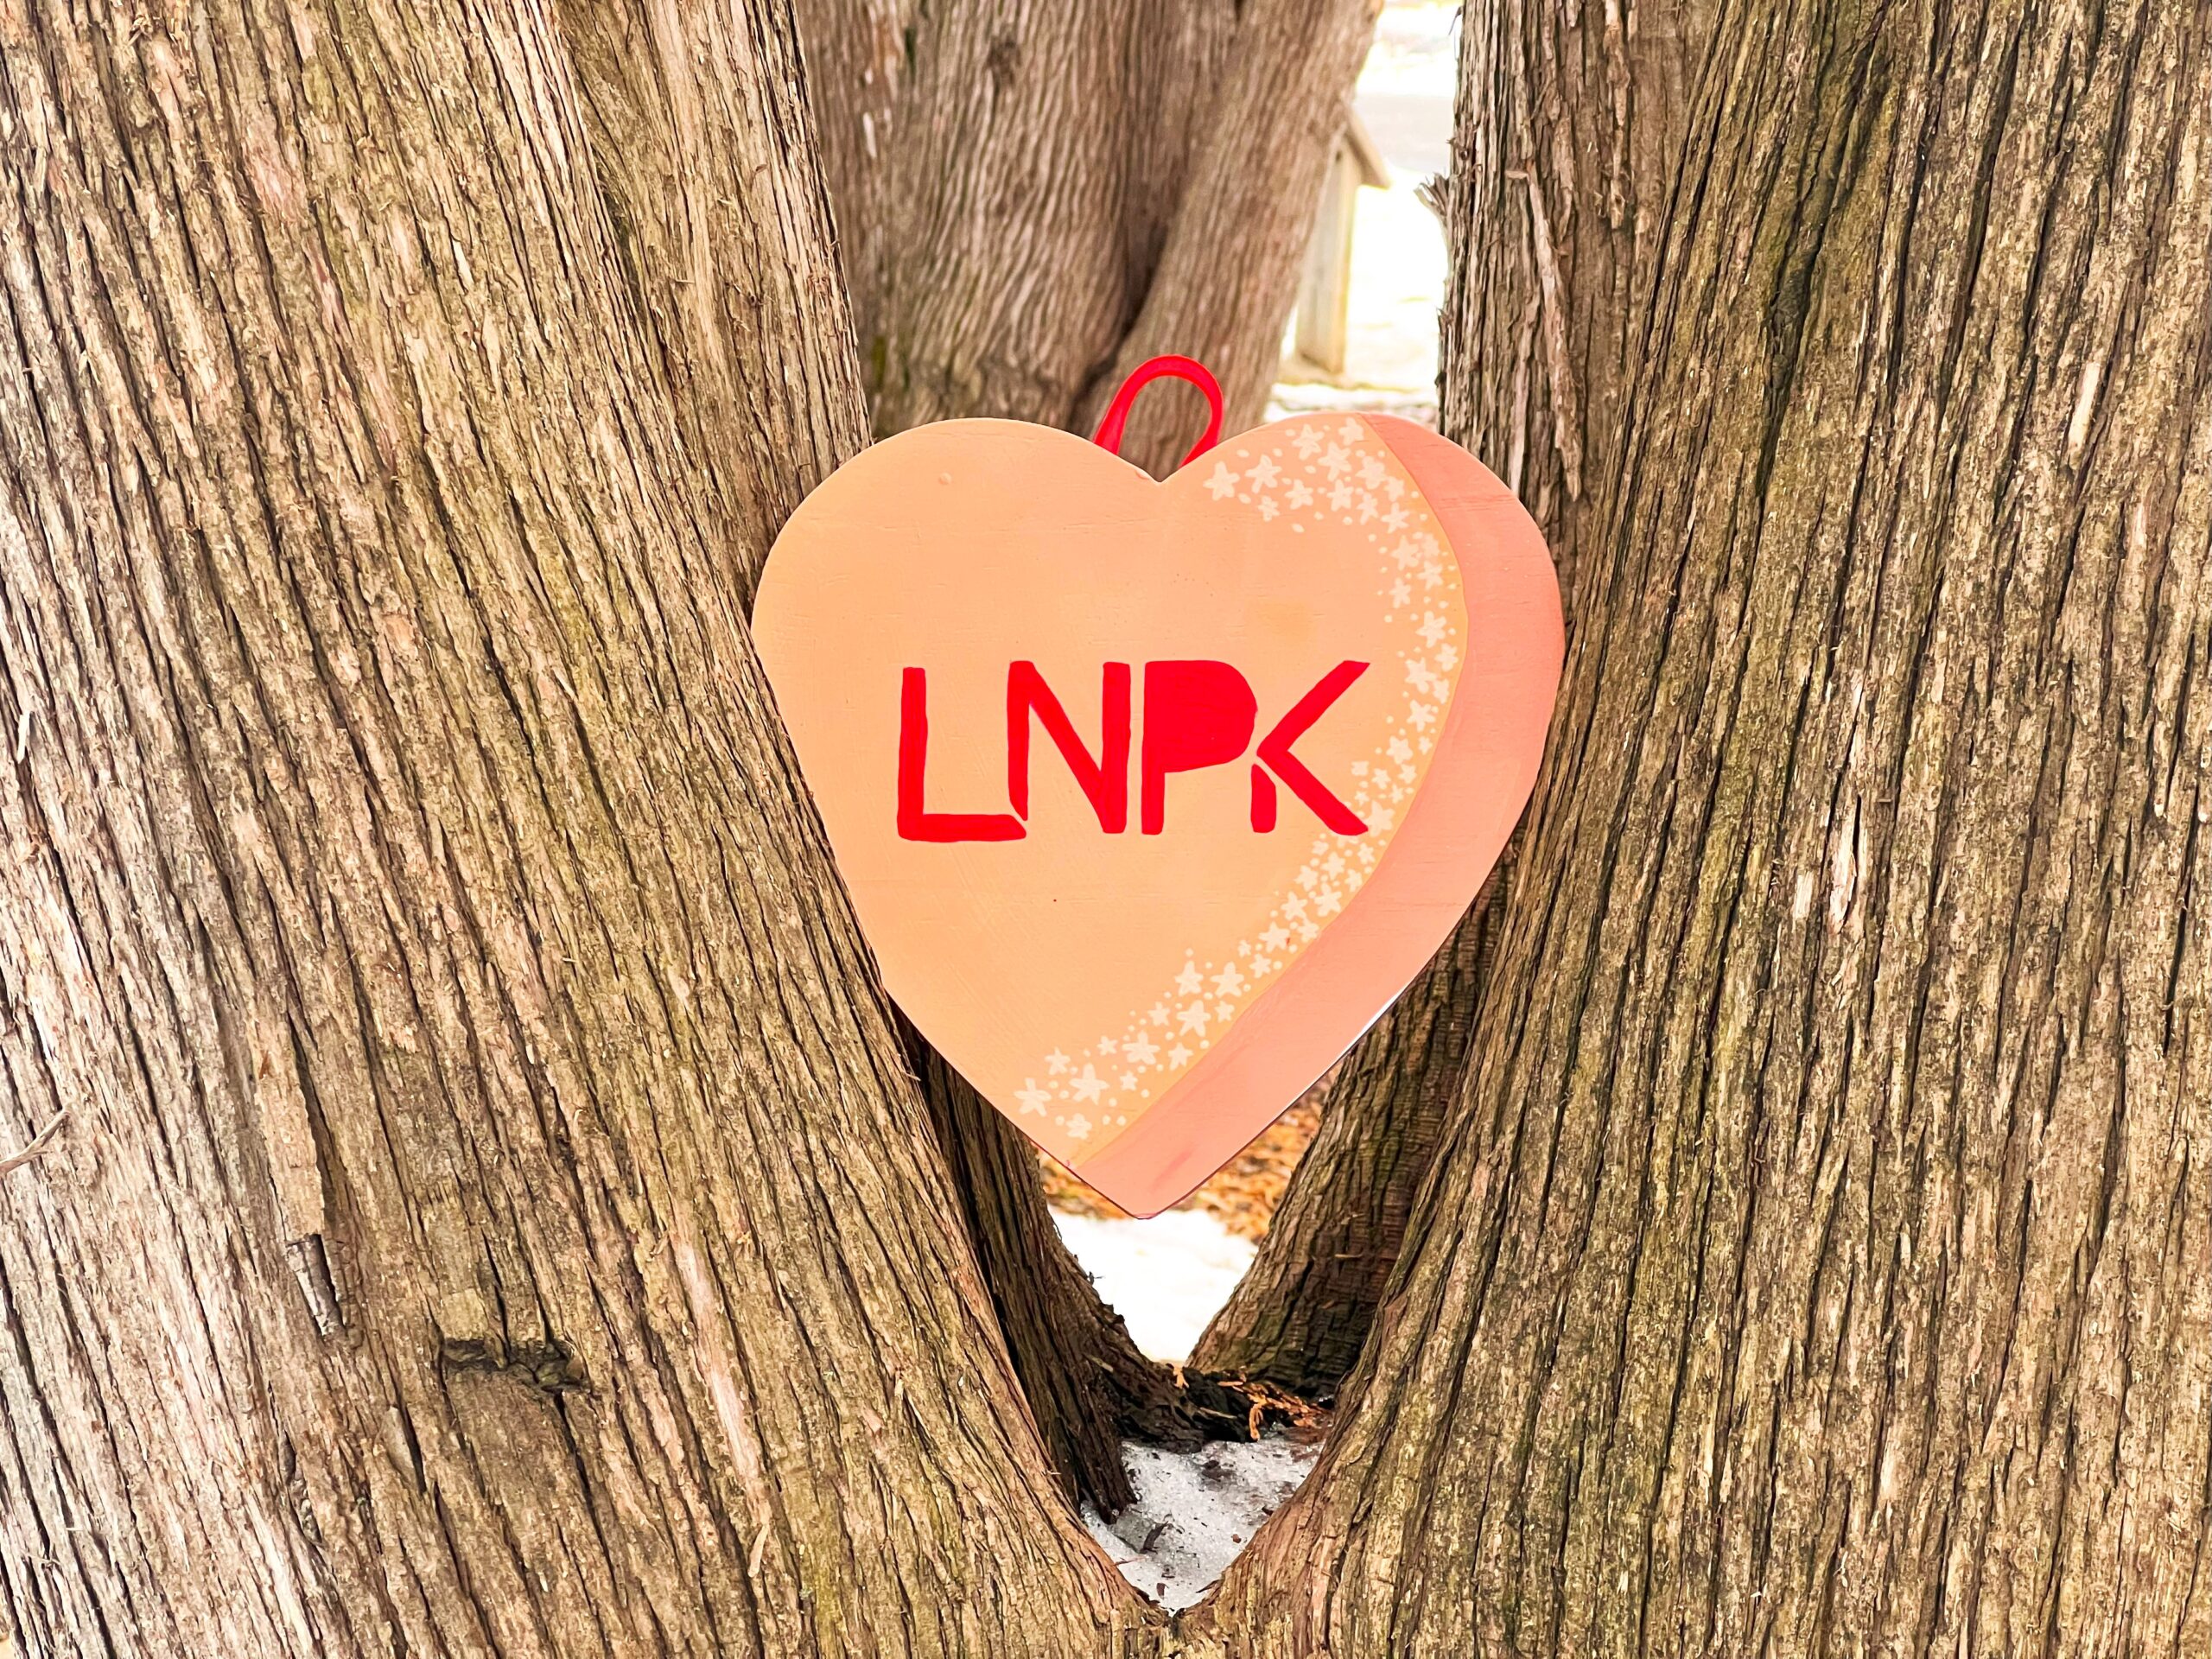 Light orange heart with "LNPK" in red sits between the large branches of a tree.